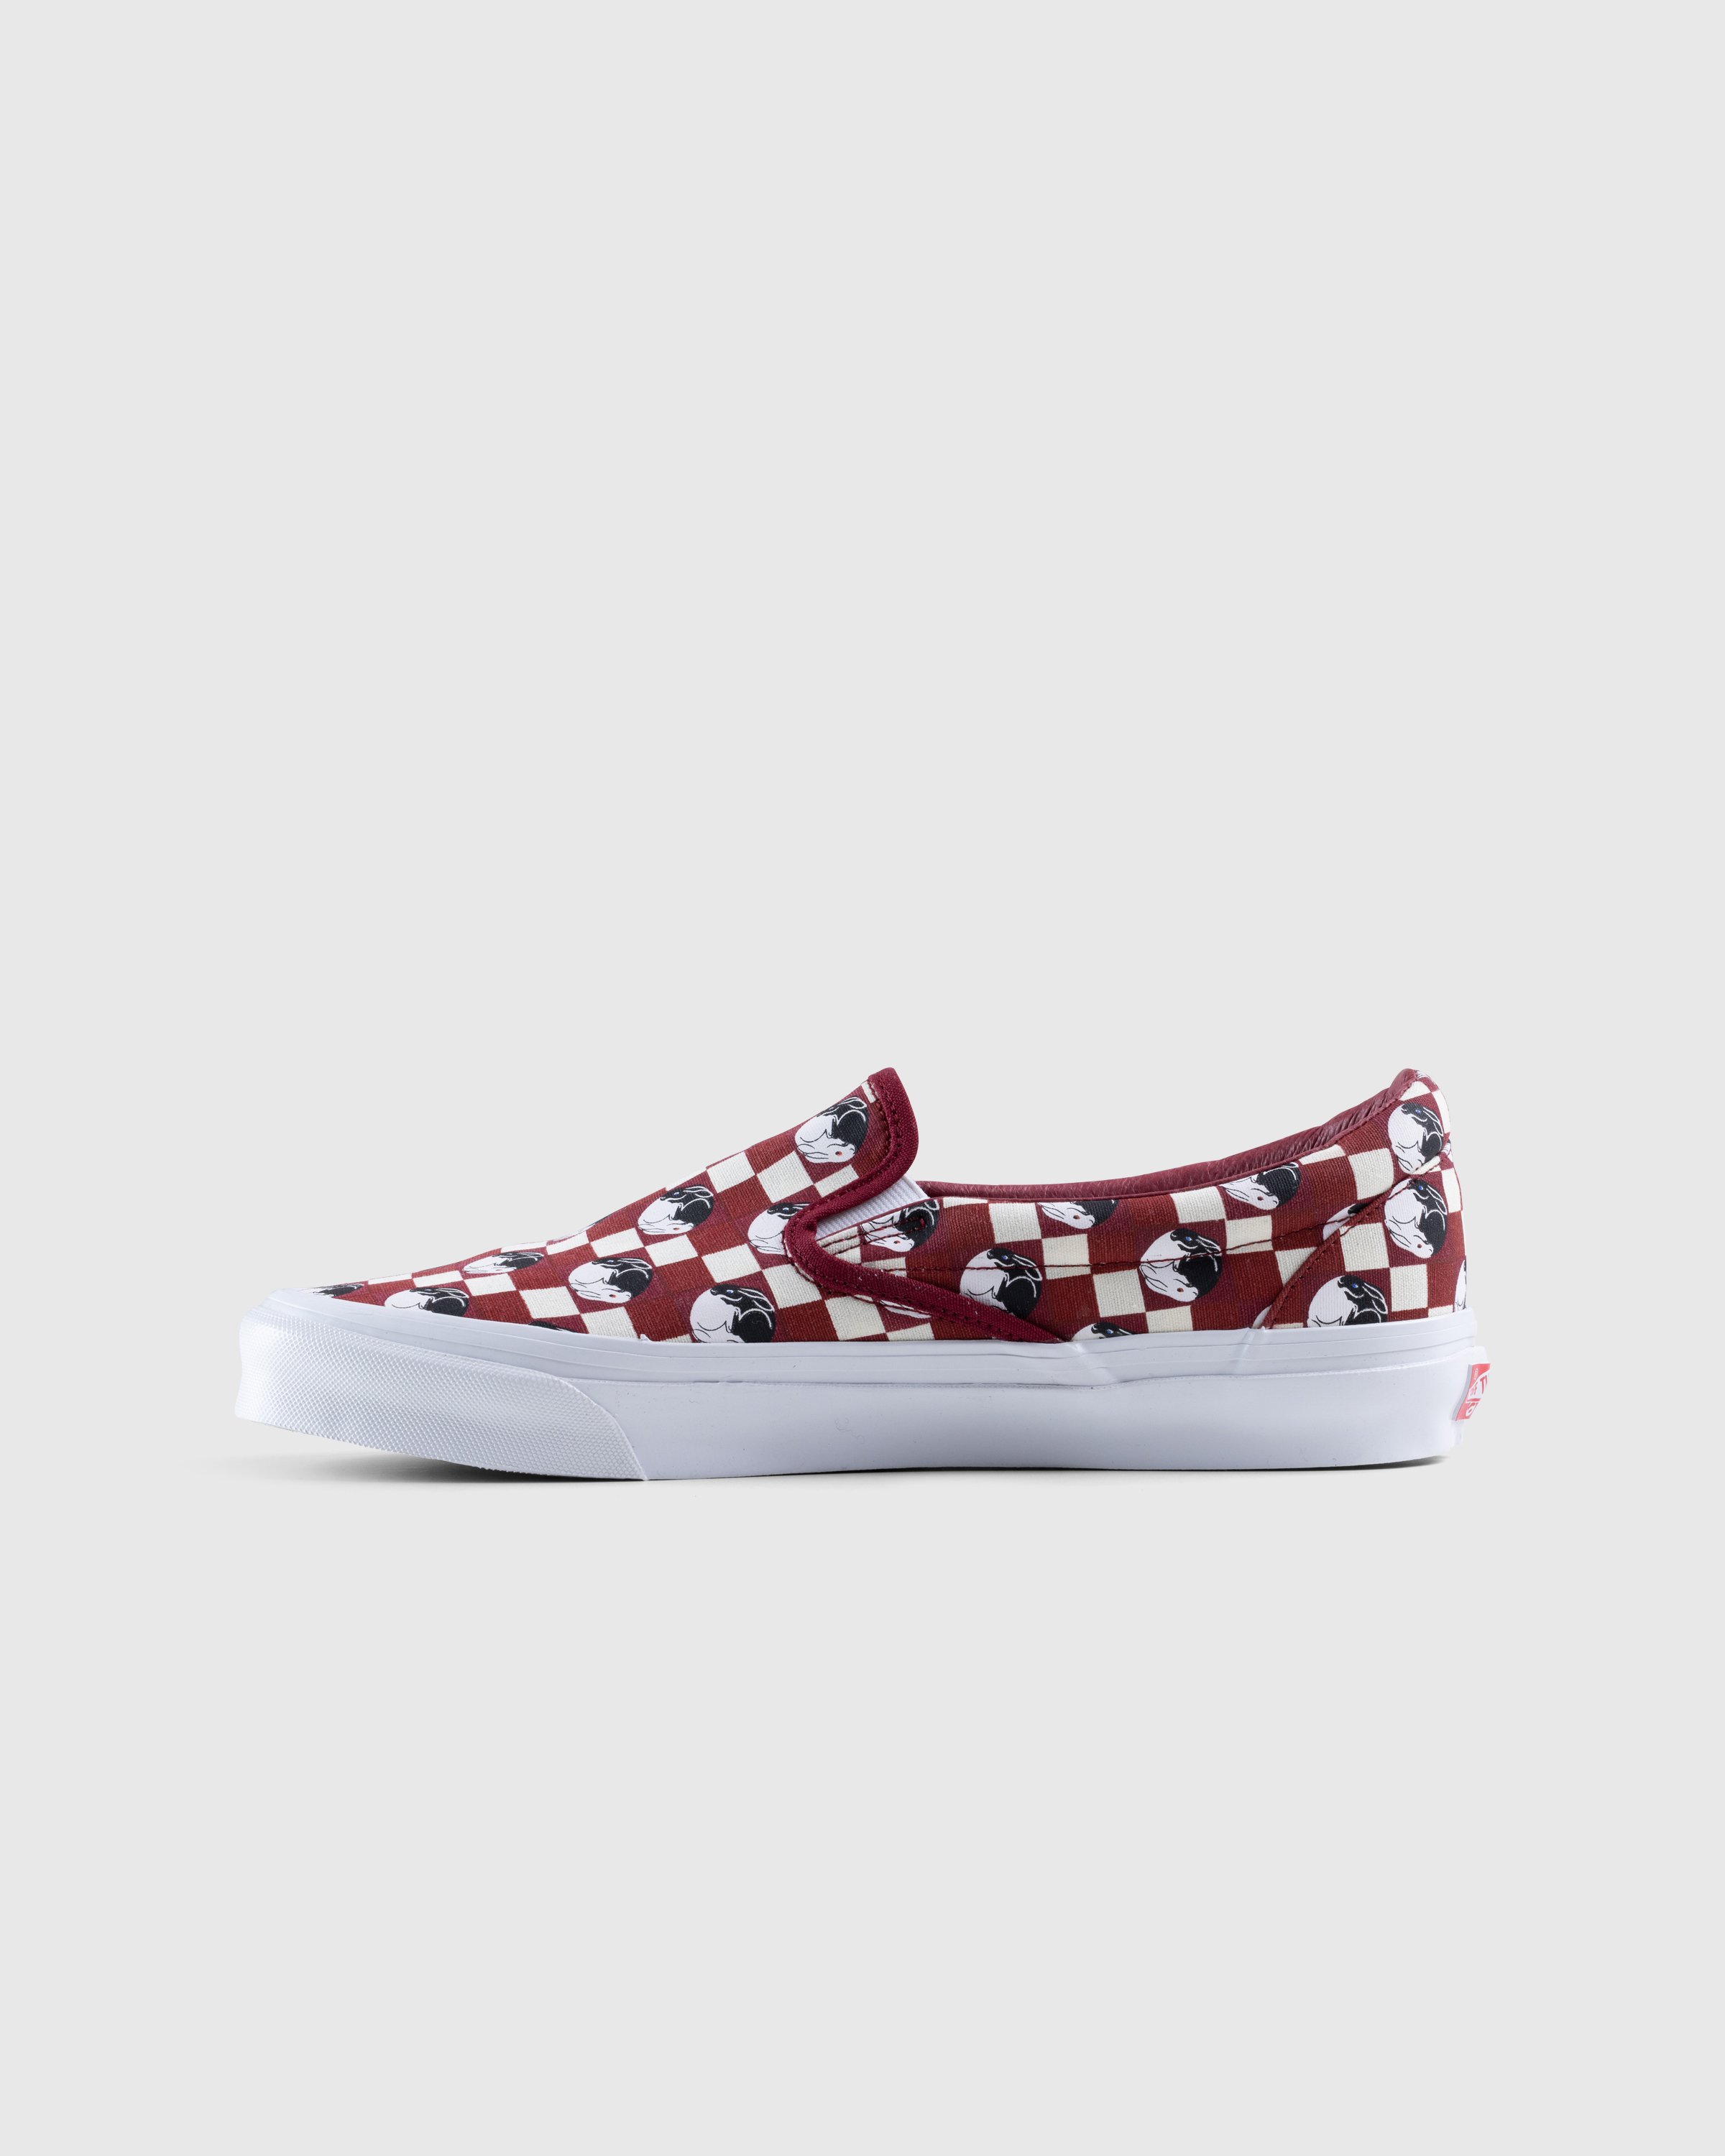 Vans - UA OG Classic Slip-On Year of the Rabbit Red - Footwear - Red - Image 2